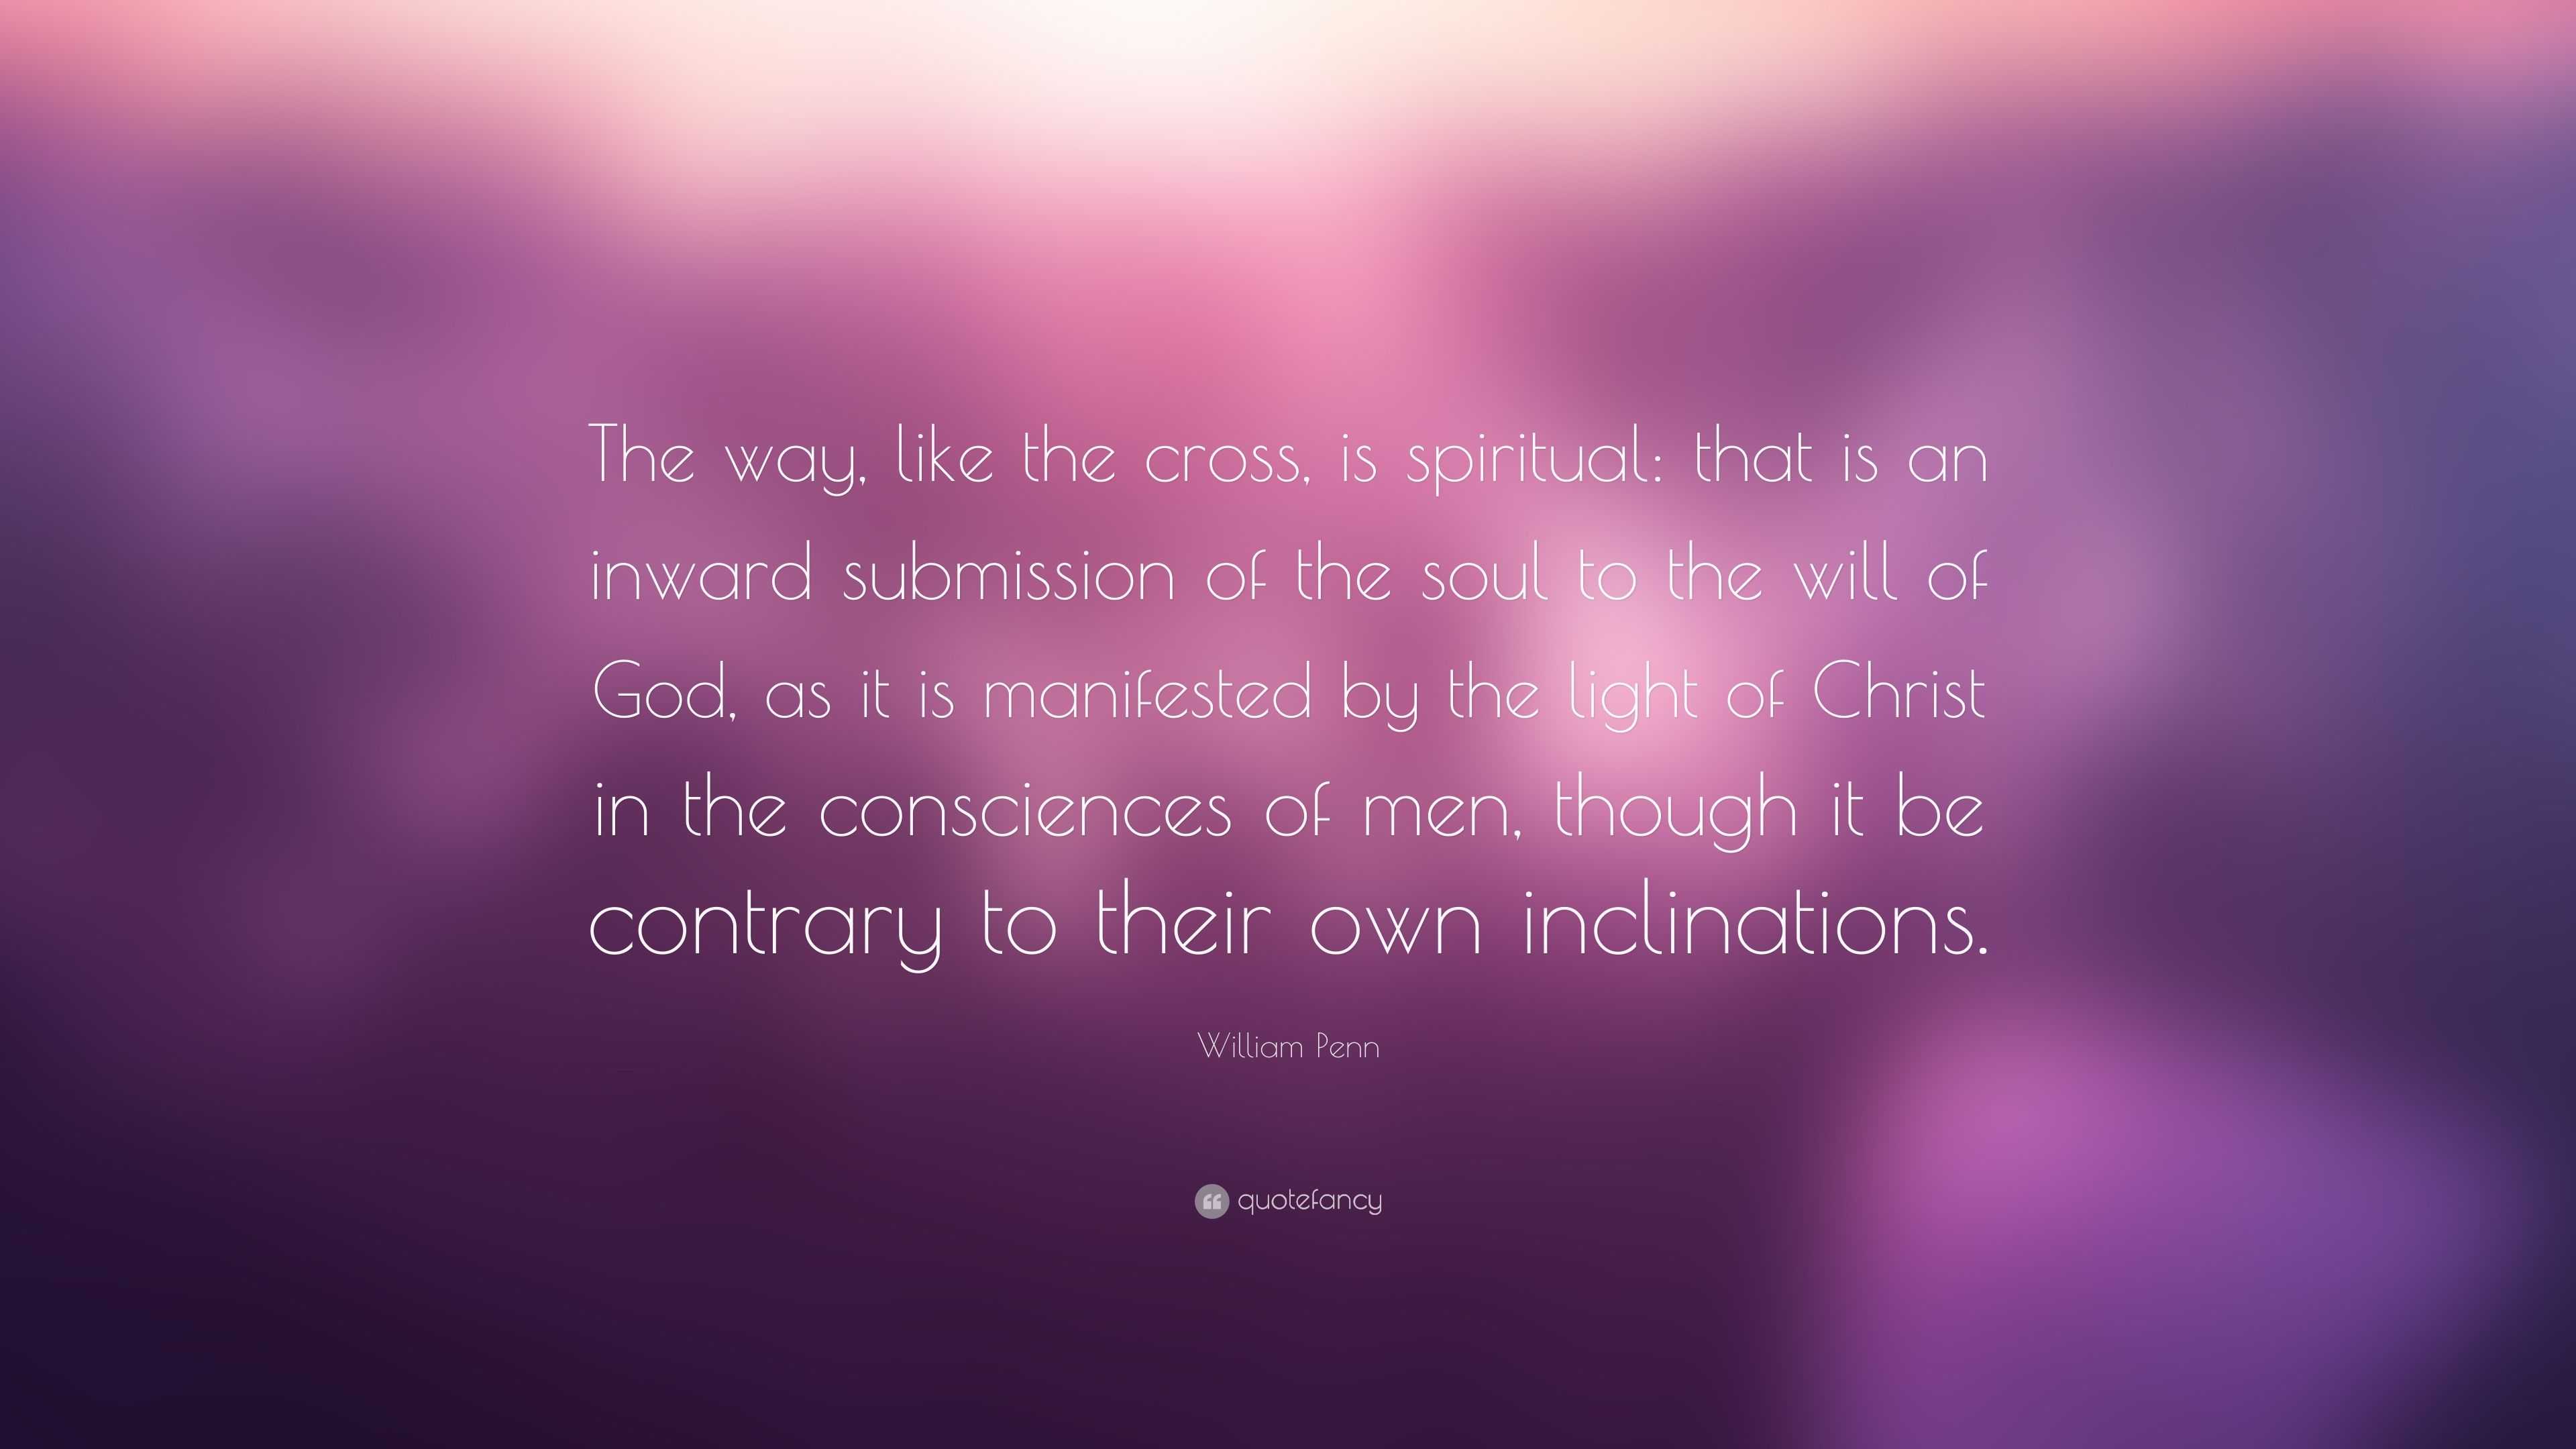 William Penn Quote: “The way, like the cross, is spiritual: that is an ...